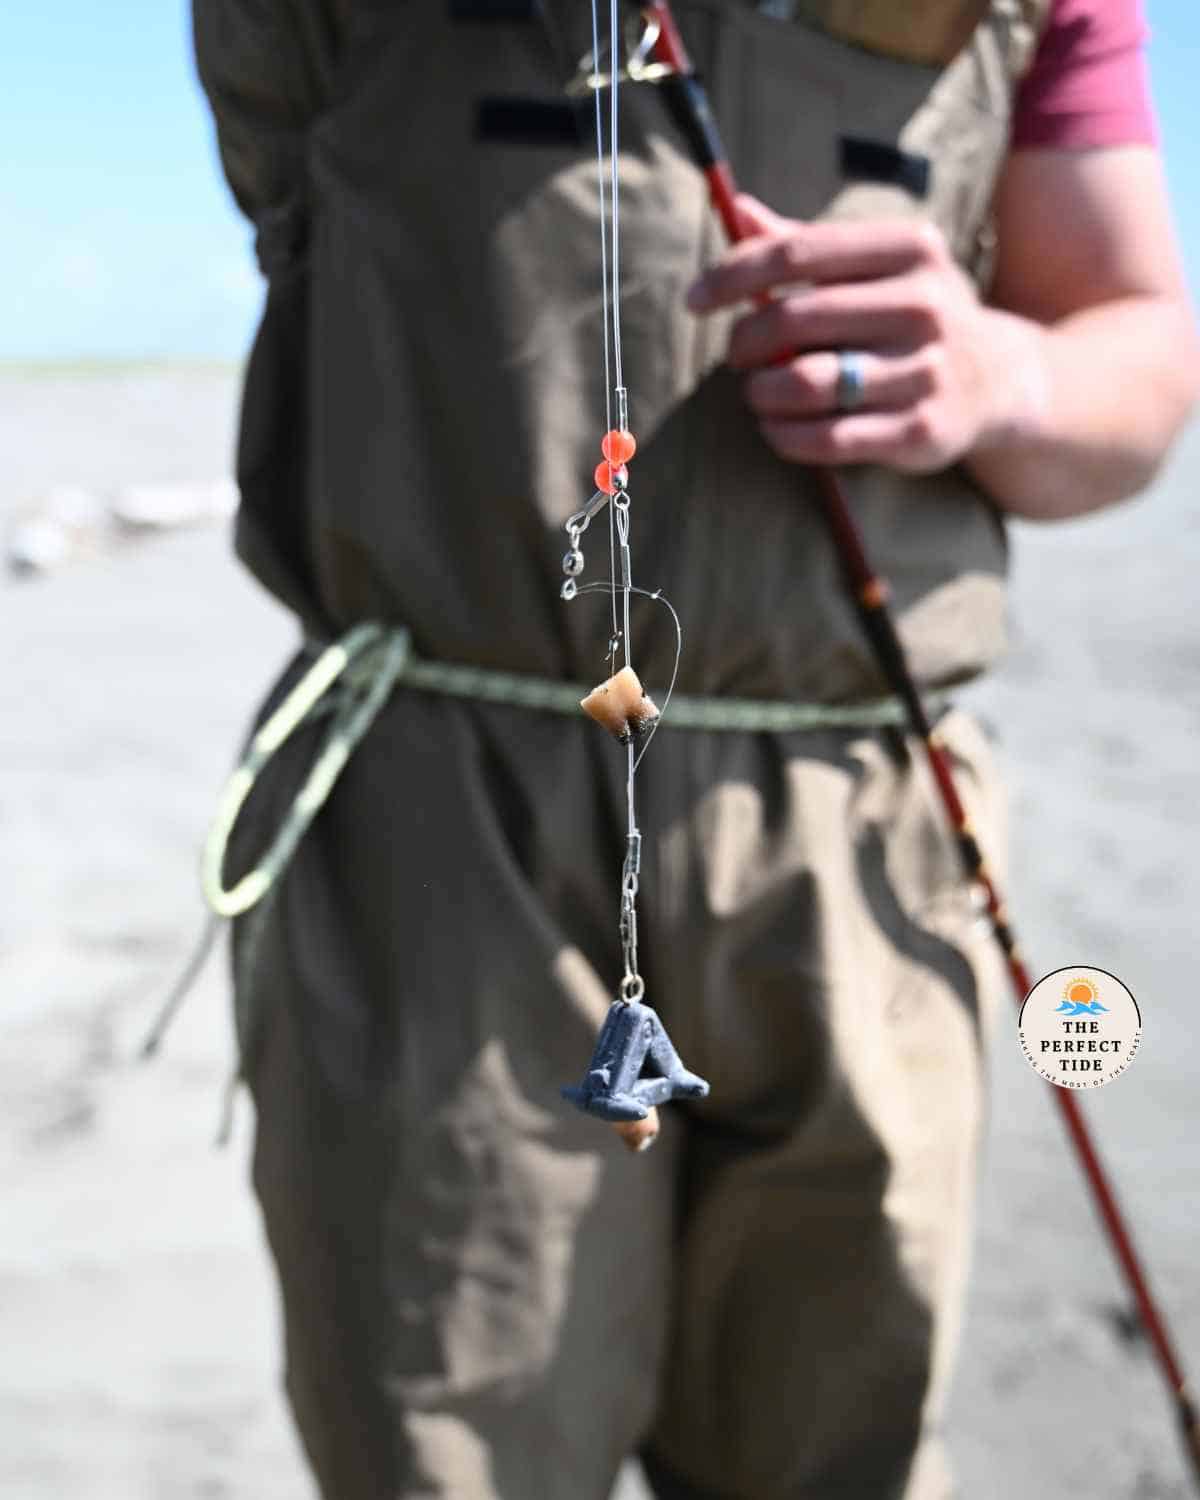 rig and hook with bait on it ready for surf fishing for perch